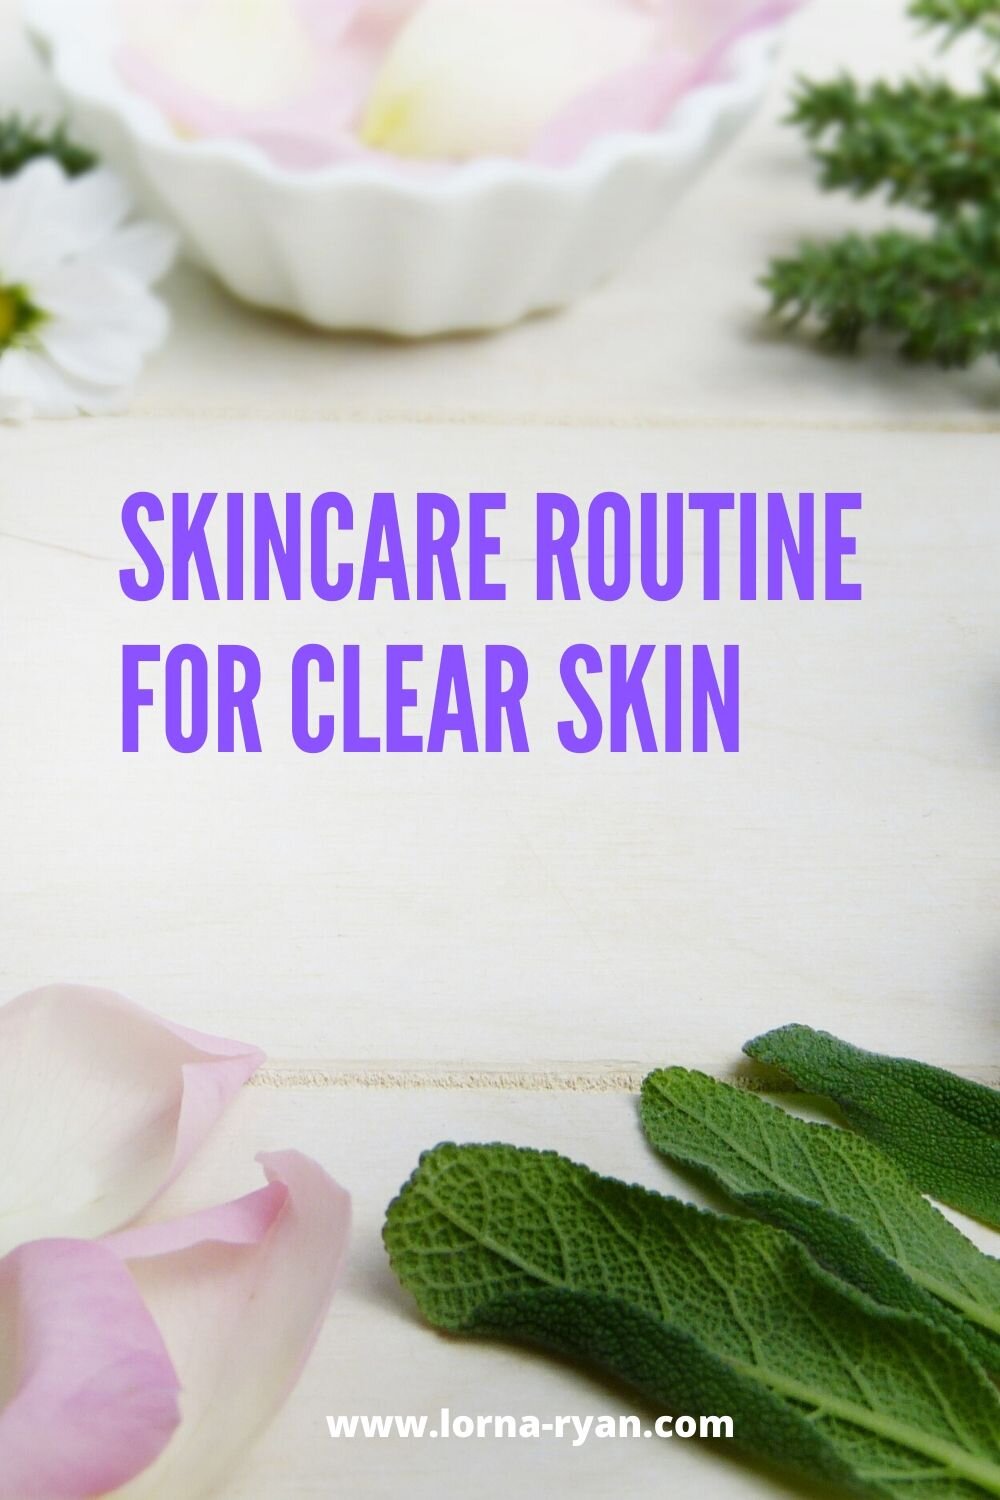 Skincare routine, skincare products, skincare tips beauty secrets, skin care, skincare lists and skincare hacks, how to care for your skin, improve your skin, acne, dry skin, sensitive skin #skincare #skin #beauty #beautytips #tips